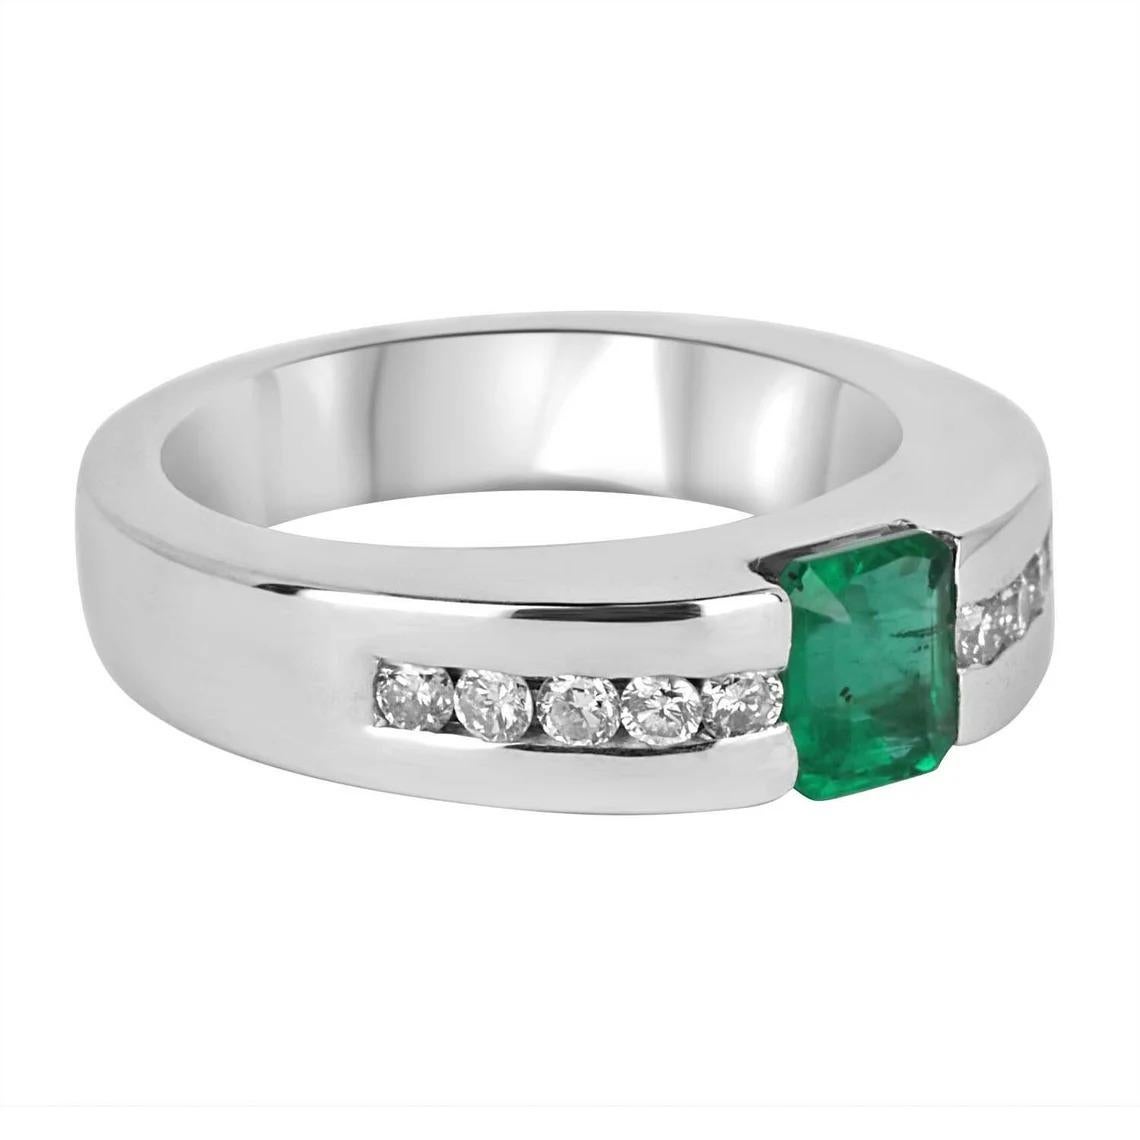 Bold and unique, this men's 14K gold ring says it all. The men's emerald, emerald cut & diamond ring features an excellent design. Securely tension set, the emerald sits within a golden frame and shows a strong green color. Very good eye clarity is